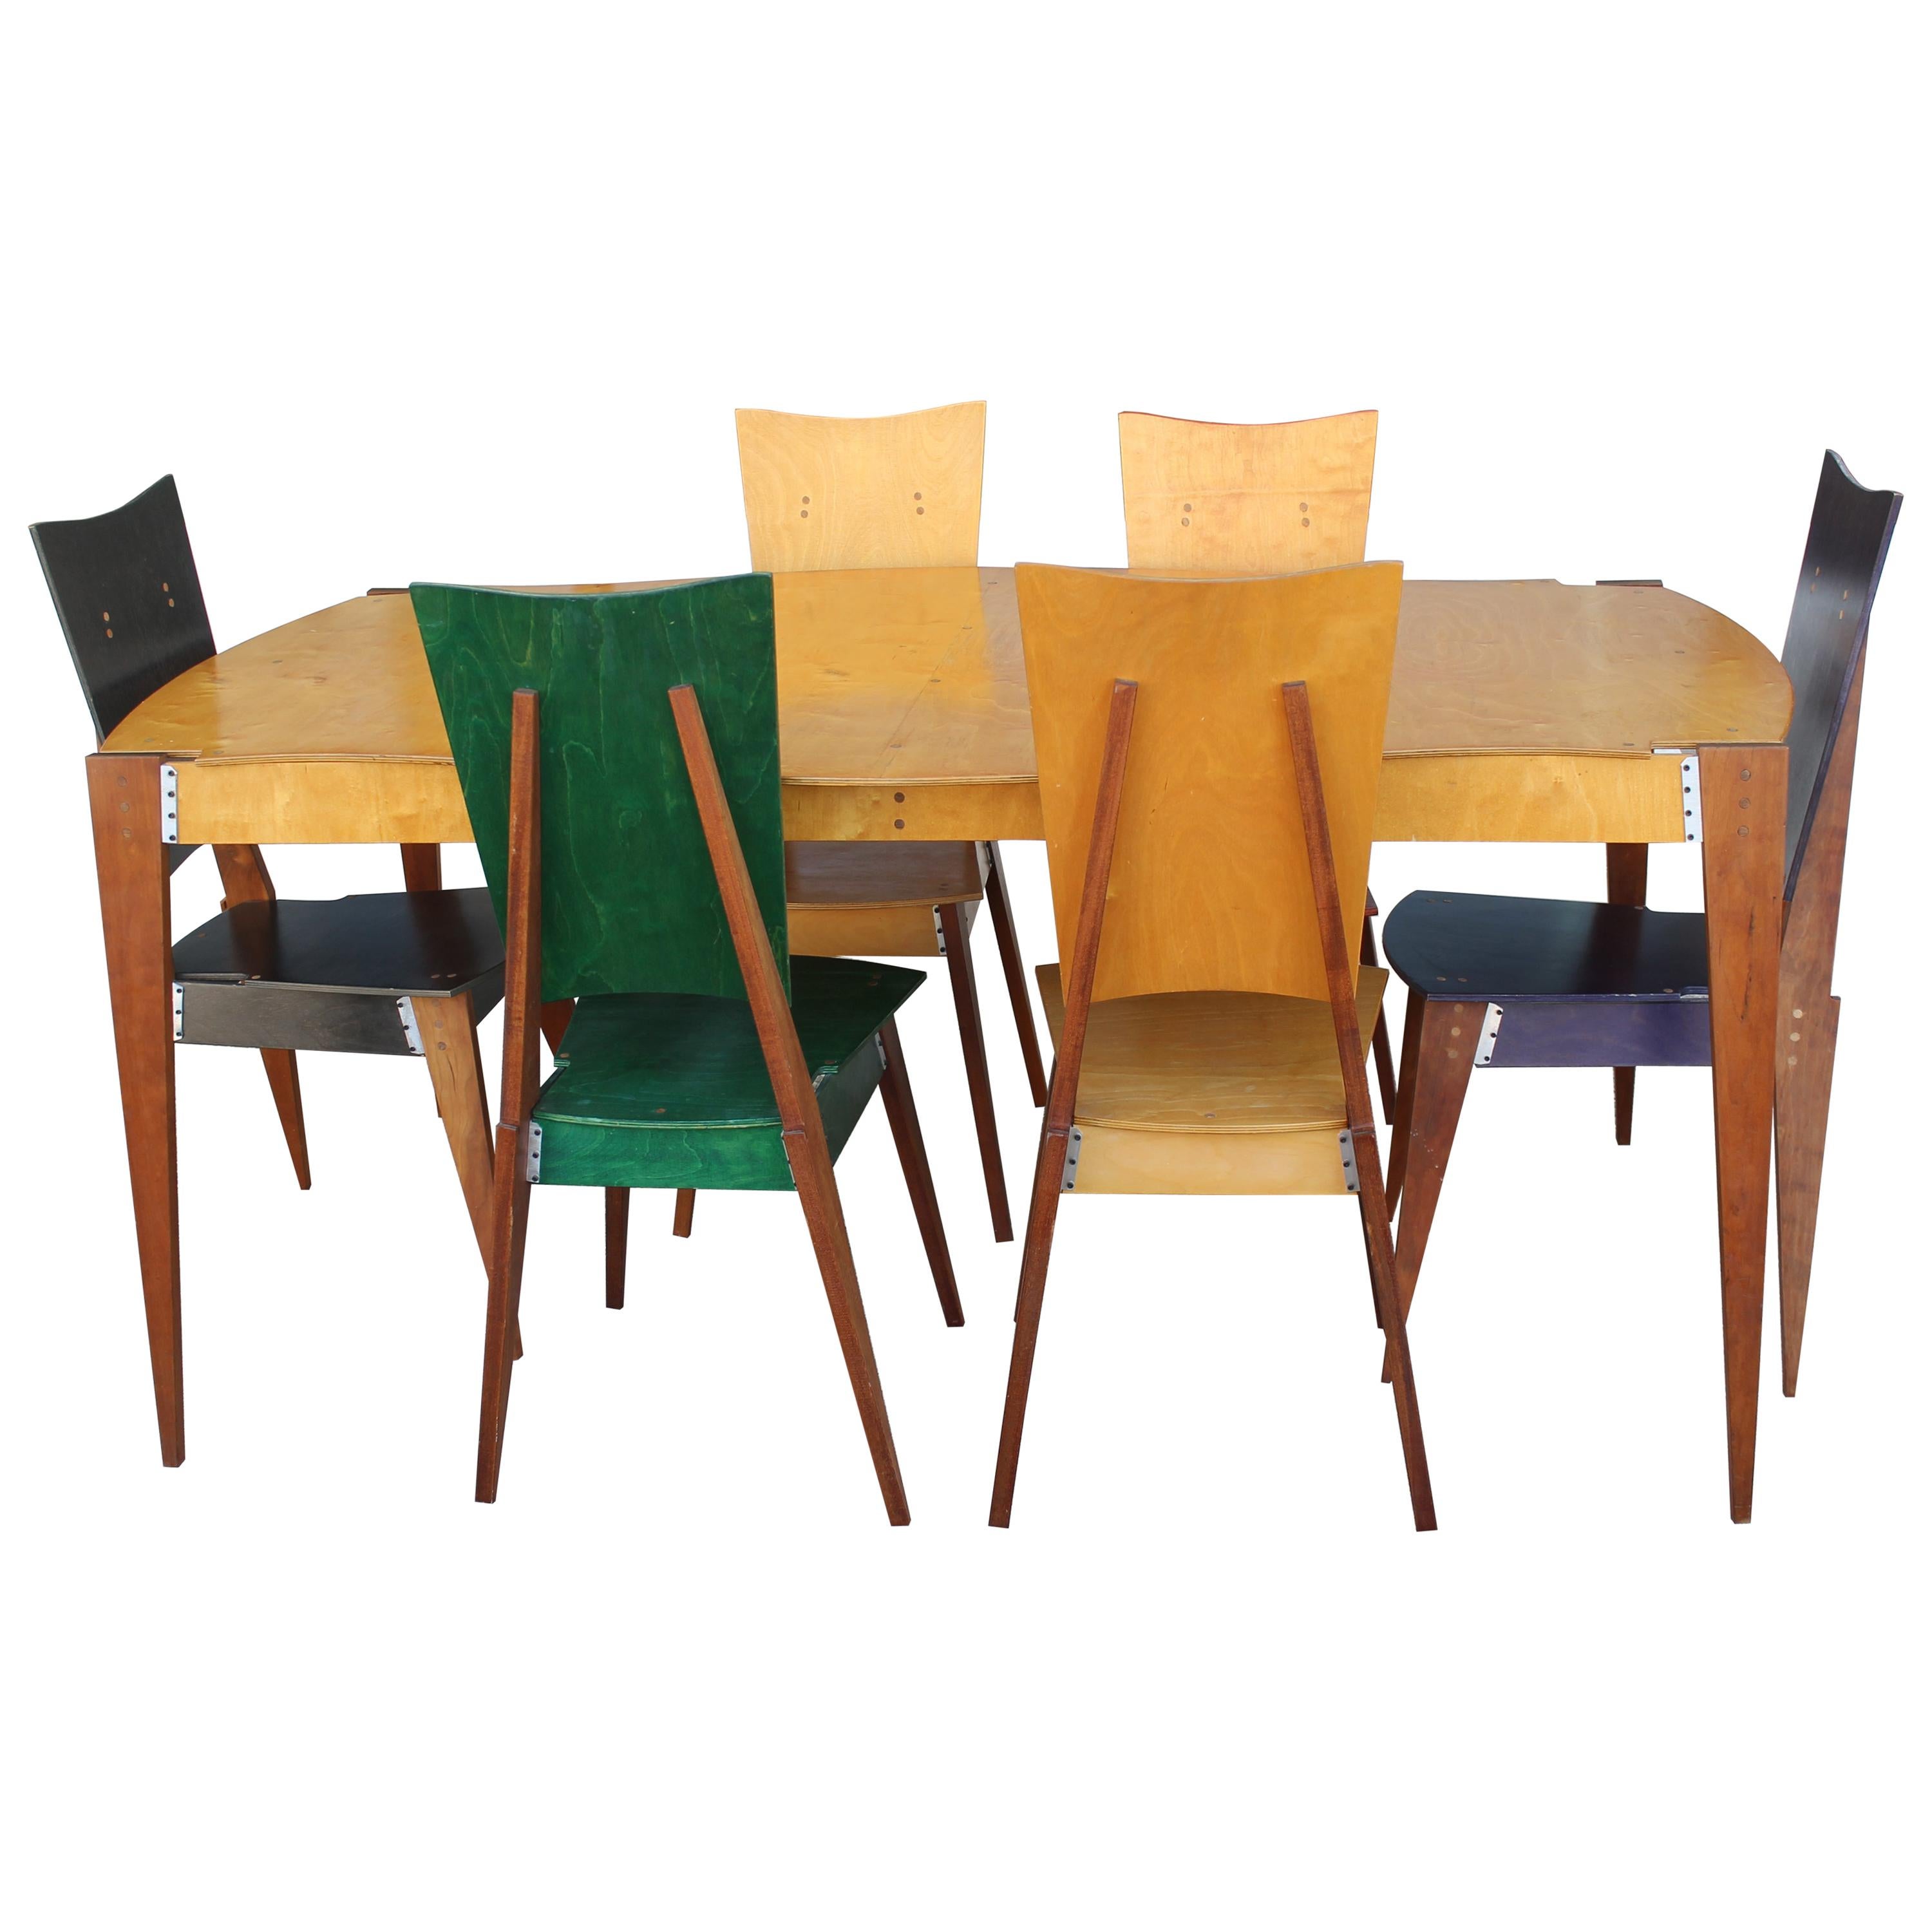 Dining Set, Six Chairs and Table by Randy Castellon, Maker Studio